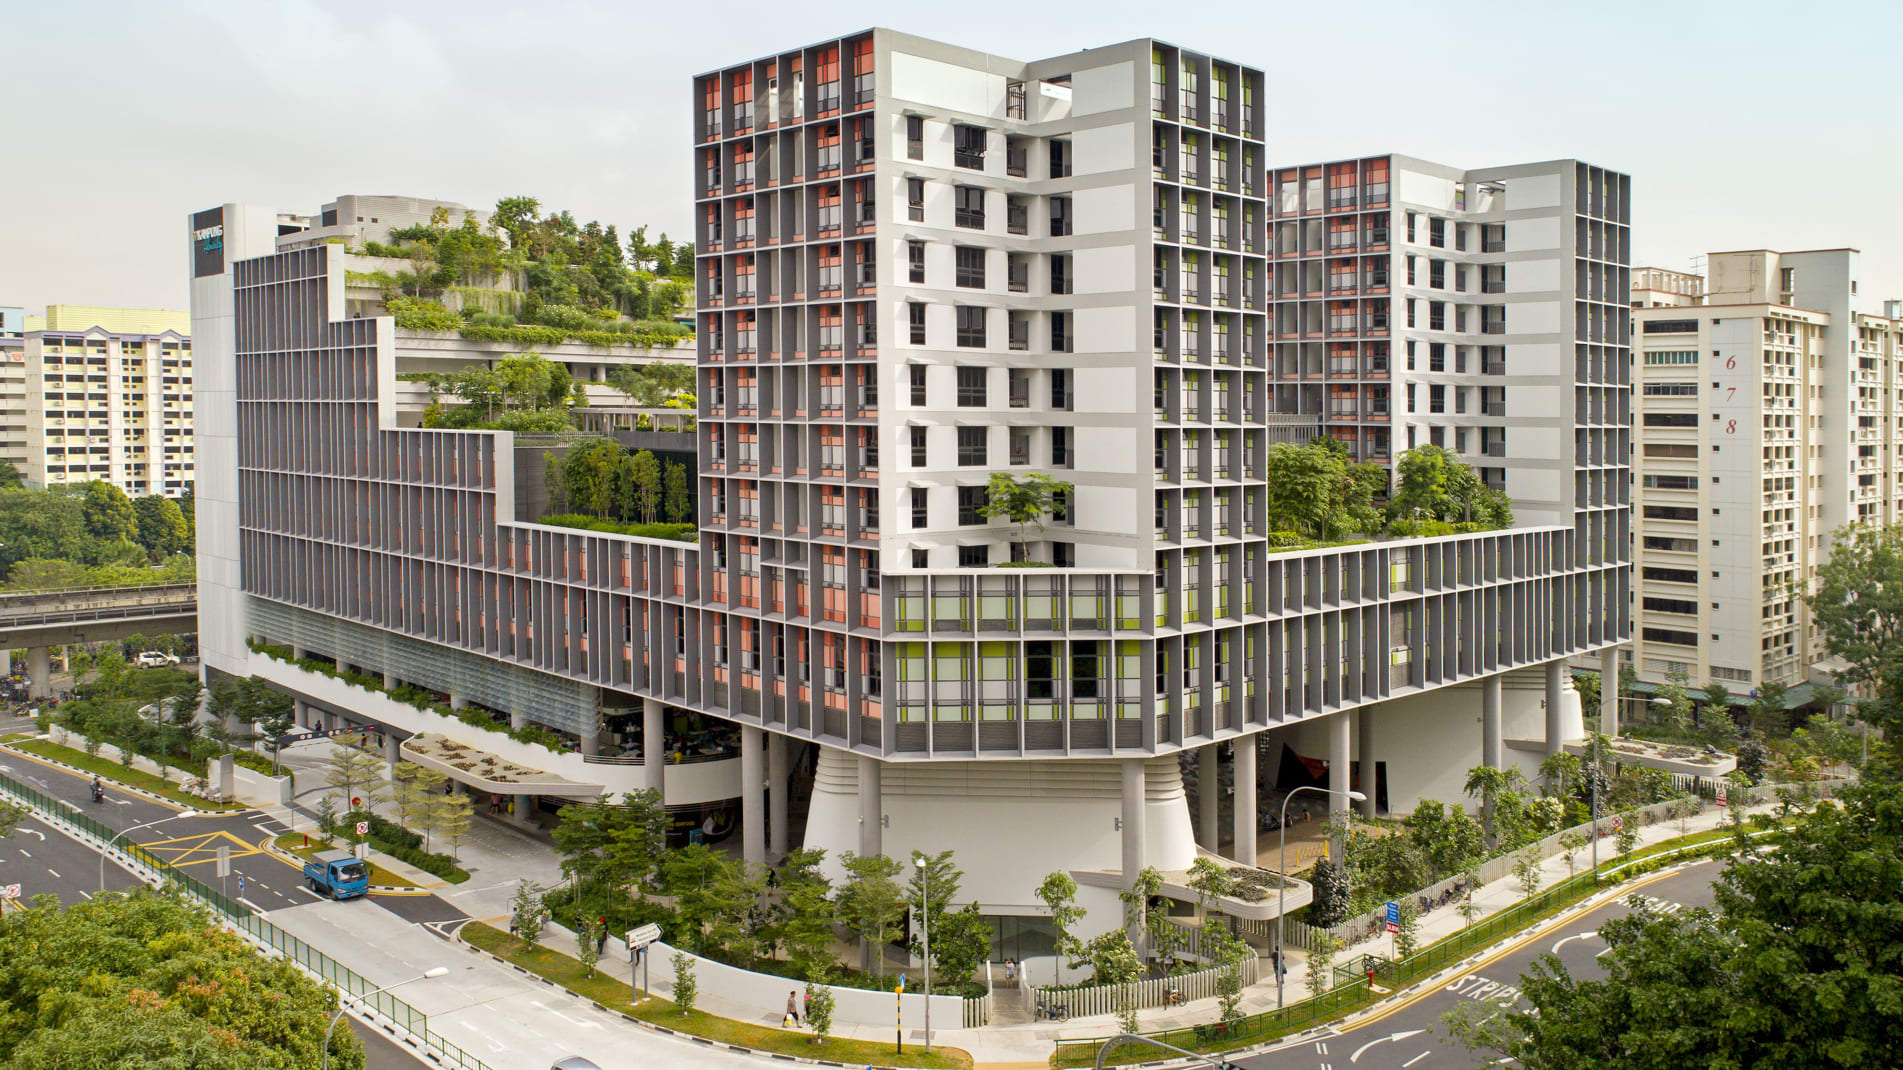 Kampung Admiralty in Singapore, winner of the World Architecture Festival's "Building of the Year" 2018